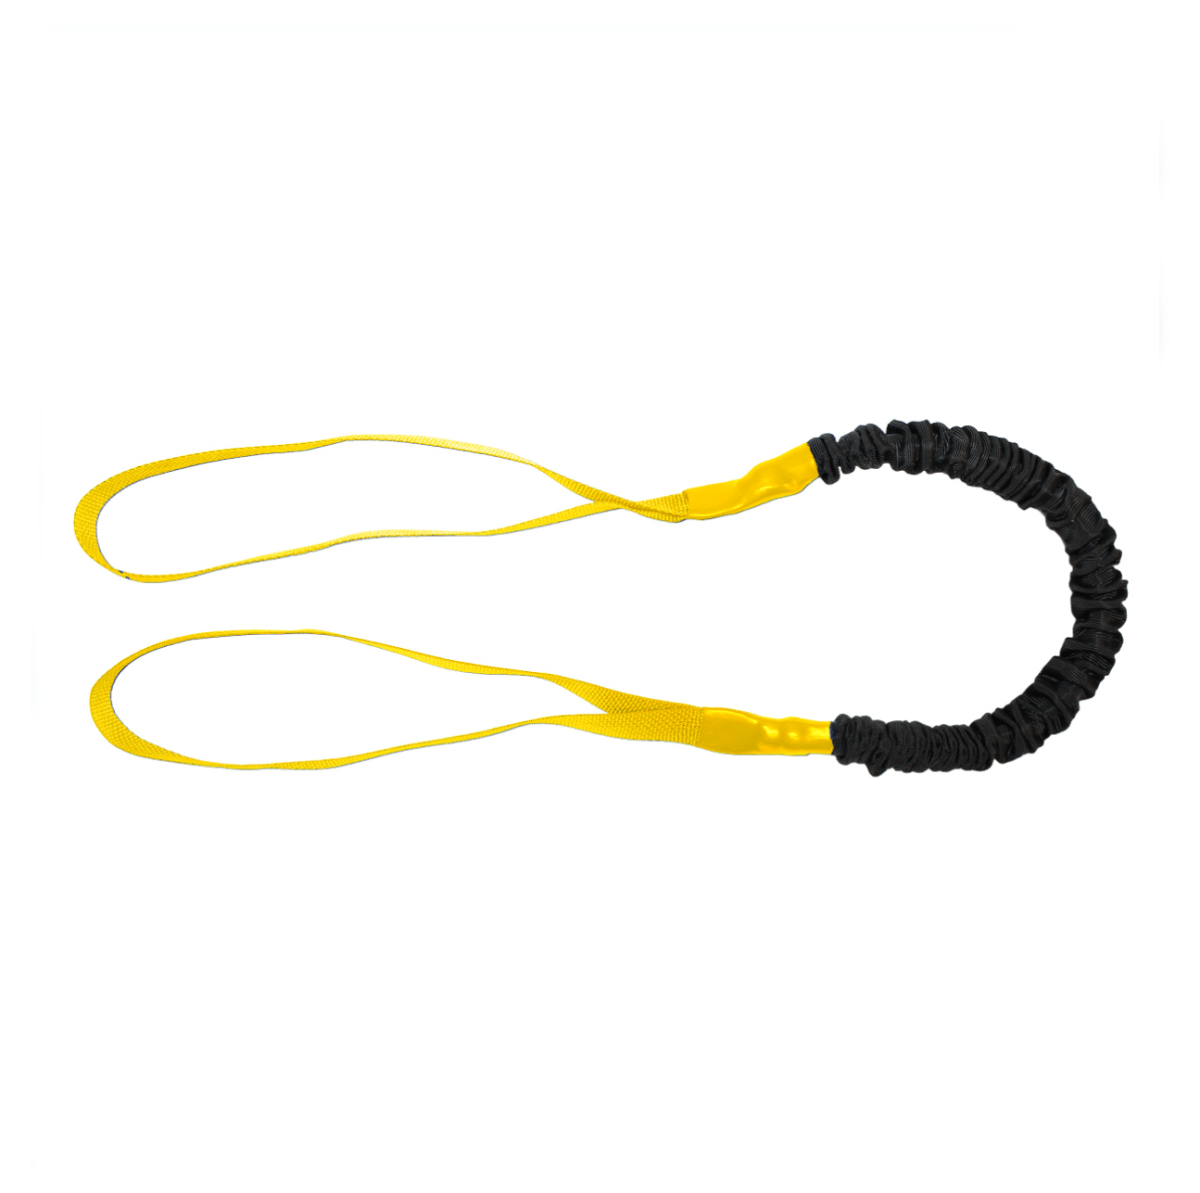 replace your theraband ribbons with this therapy band that will not pop, annoy your skin or break.  This is only 3lbs with large loops for weak grip